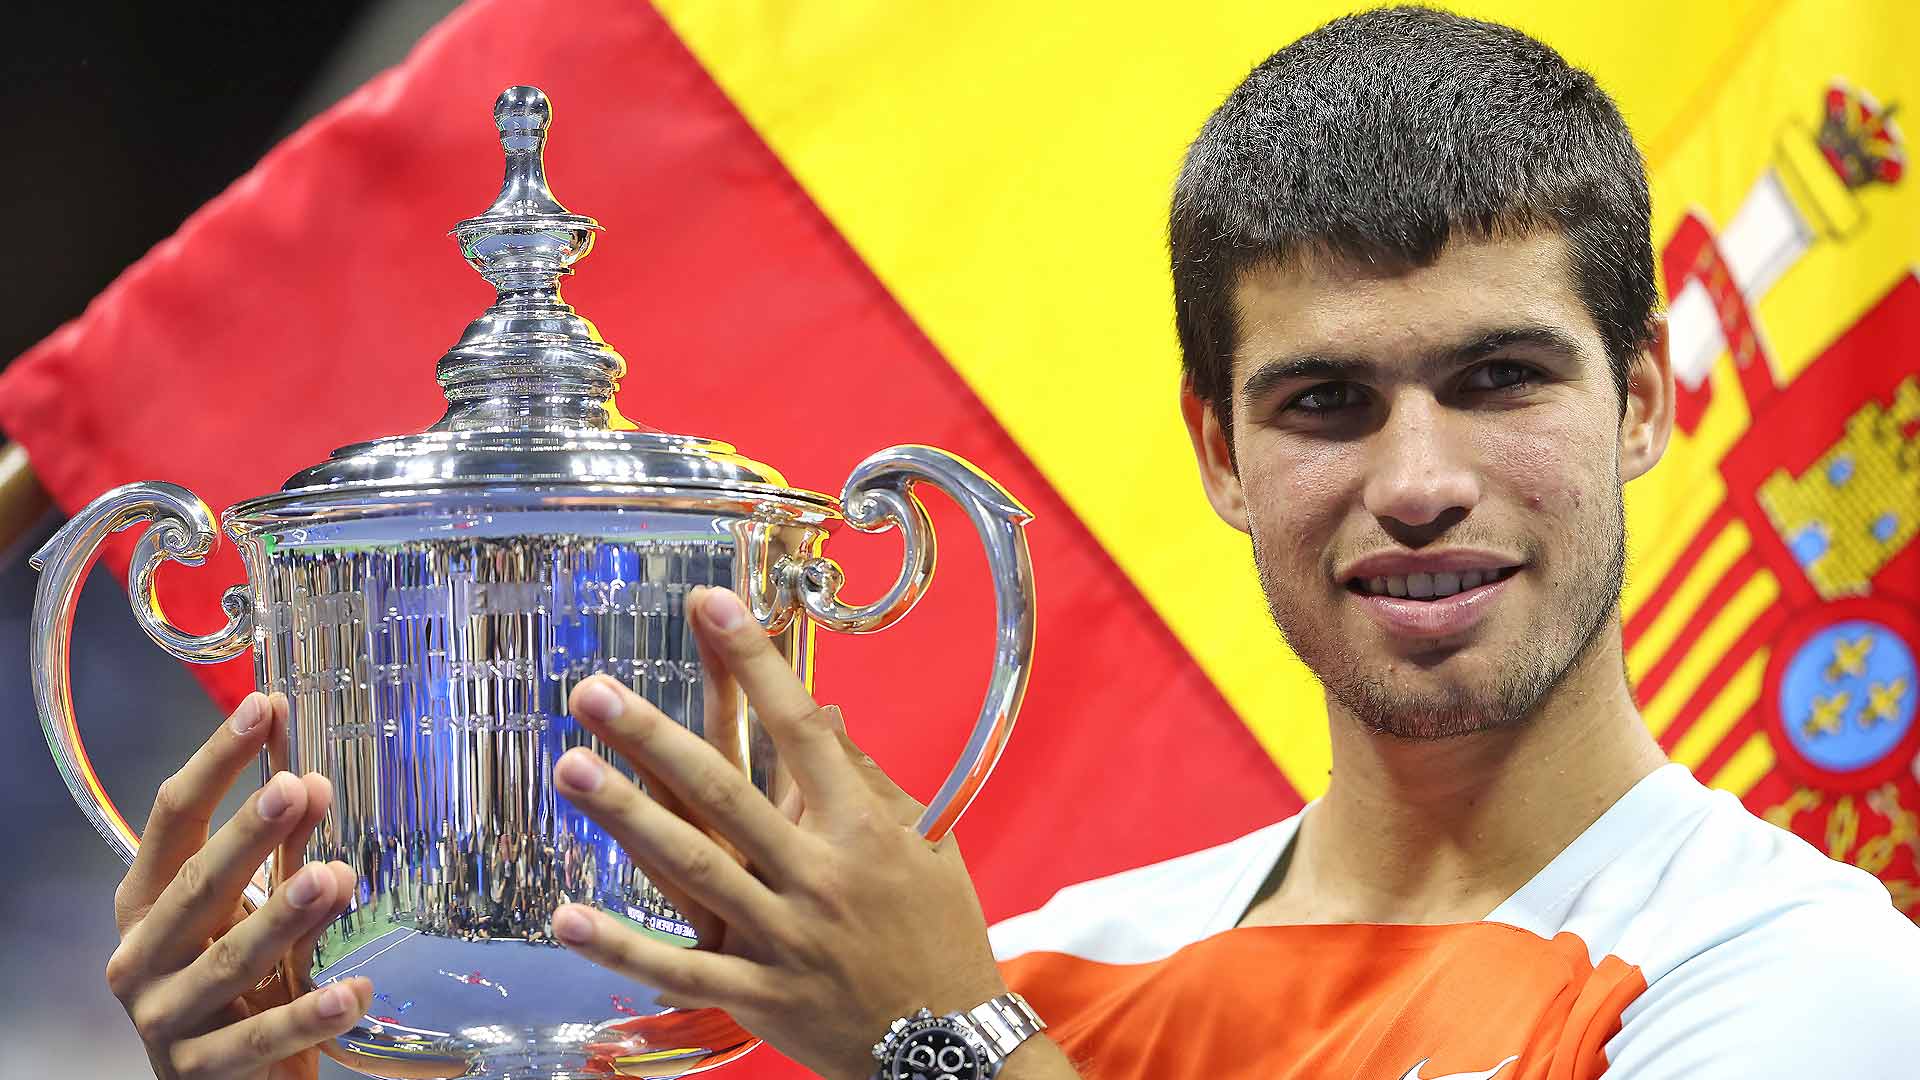 Carlos Alcaraz” /><br /><em><sup>Photo credit: Julian Finney/Getty Images<br /></sup></em><strong>Carlos’ coolest thing: winning the Mutua Madrid Open in front of family and friends<br /></strong>Alcaraz won five of his six tour-level titles this season. The closest to home – literally – was his win at the Mutua Madrid Open. The Spaniard defeated three of the top four players in the Pepperstone ATP ranking – Rafael Nadal, Novak Djokovic and Alexander Zverev – on his way to the trophy in front of his family and friends.</p>
<p>“I am a very family child. I’ve been a kid that whenever I can, I’d rather be at home than anywhere else,” Alcaraz said after his win. “For me to celebrate this title, which is very special, with my family, with my cousins, uncles, grandparents, all my family in general, it’s very, very special.”</p>
<p><strong>Carlos’ craziest: a coach’s surprise<br /></strong>When Alcaraz advanced to the final of the Miami Open presented by Itau, it was a special moment. In 2021, the Spaniard lost in the first round on his debut in Miami. A year later, he entered his first ATP Masters 1000 championship match.</p>
<p>The only missing piece was his coach, Juan Carlos Ferrero, who mourned the loss of his father at home. During the tournament, Alcaraz paid tribute to Ferrero and his family. The teen got through to him.</p>
<p>“After this happened it was hard for me, it was hard for him,” Ferrero said of his absence from Miami. “And even this way, he could stay on the same level and try to… stay even more focused.”</p>
<p><img decoding=